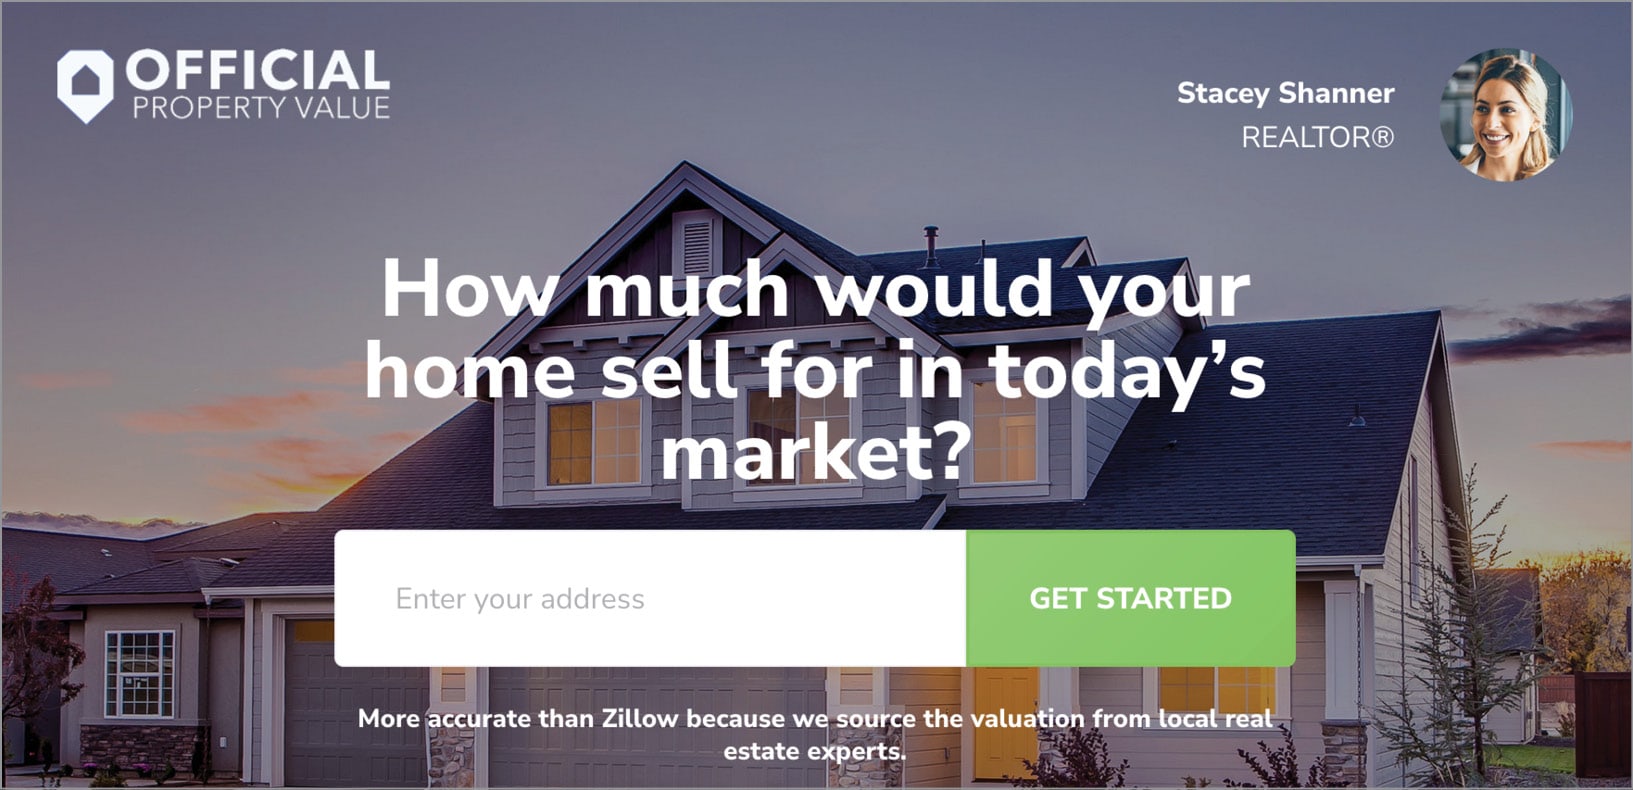 A landing page titled how much would your home sell for in today's market. Included a text field where